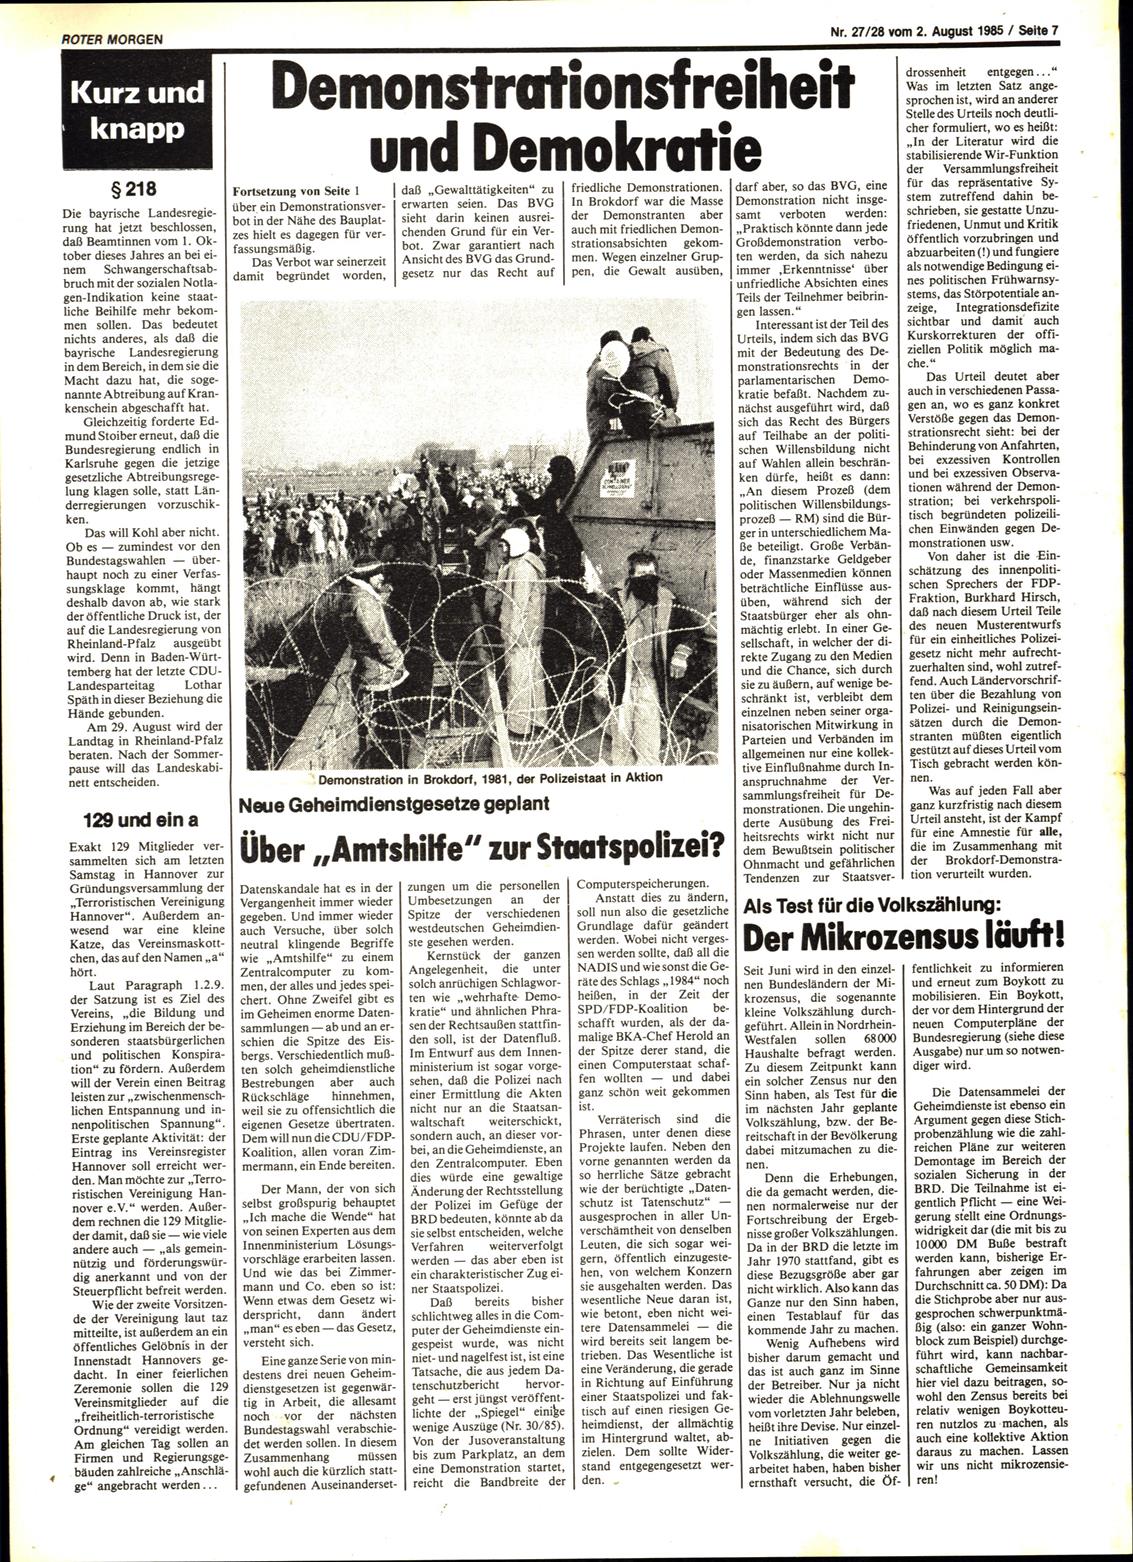 Roter Morgen, 19. Jg., 2. August 1985, Nr. 27/28, Seite 7